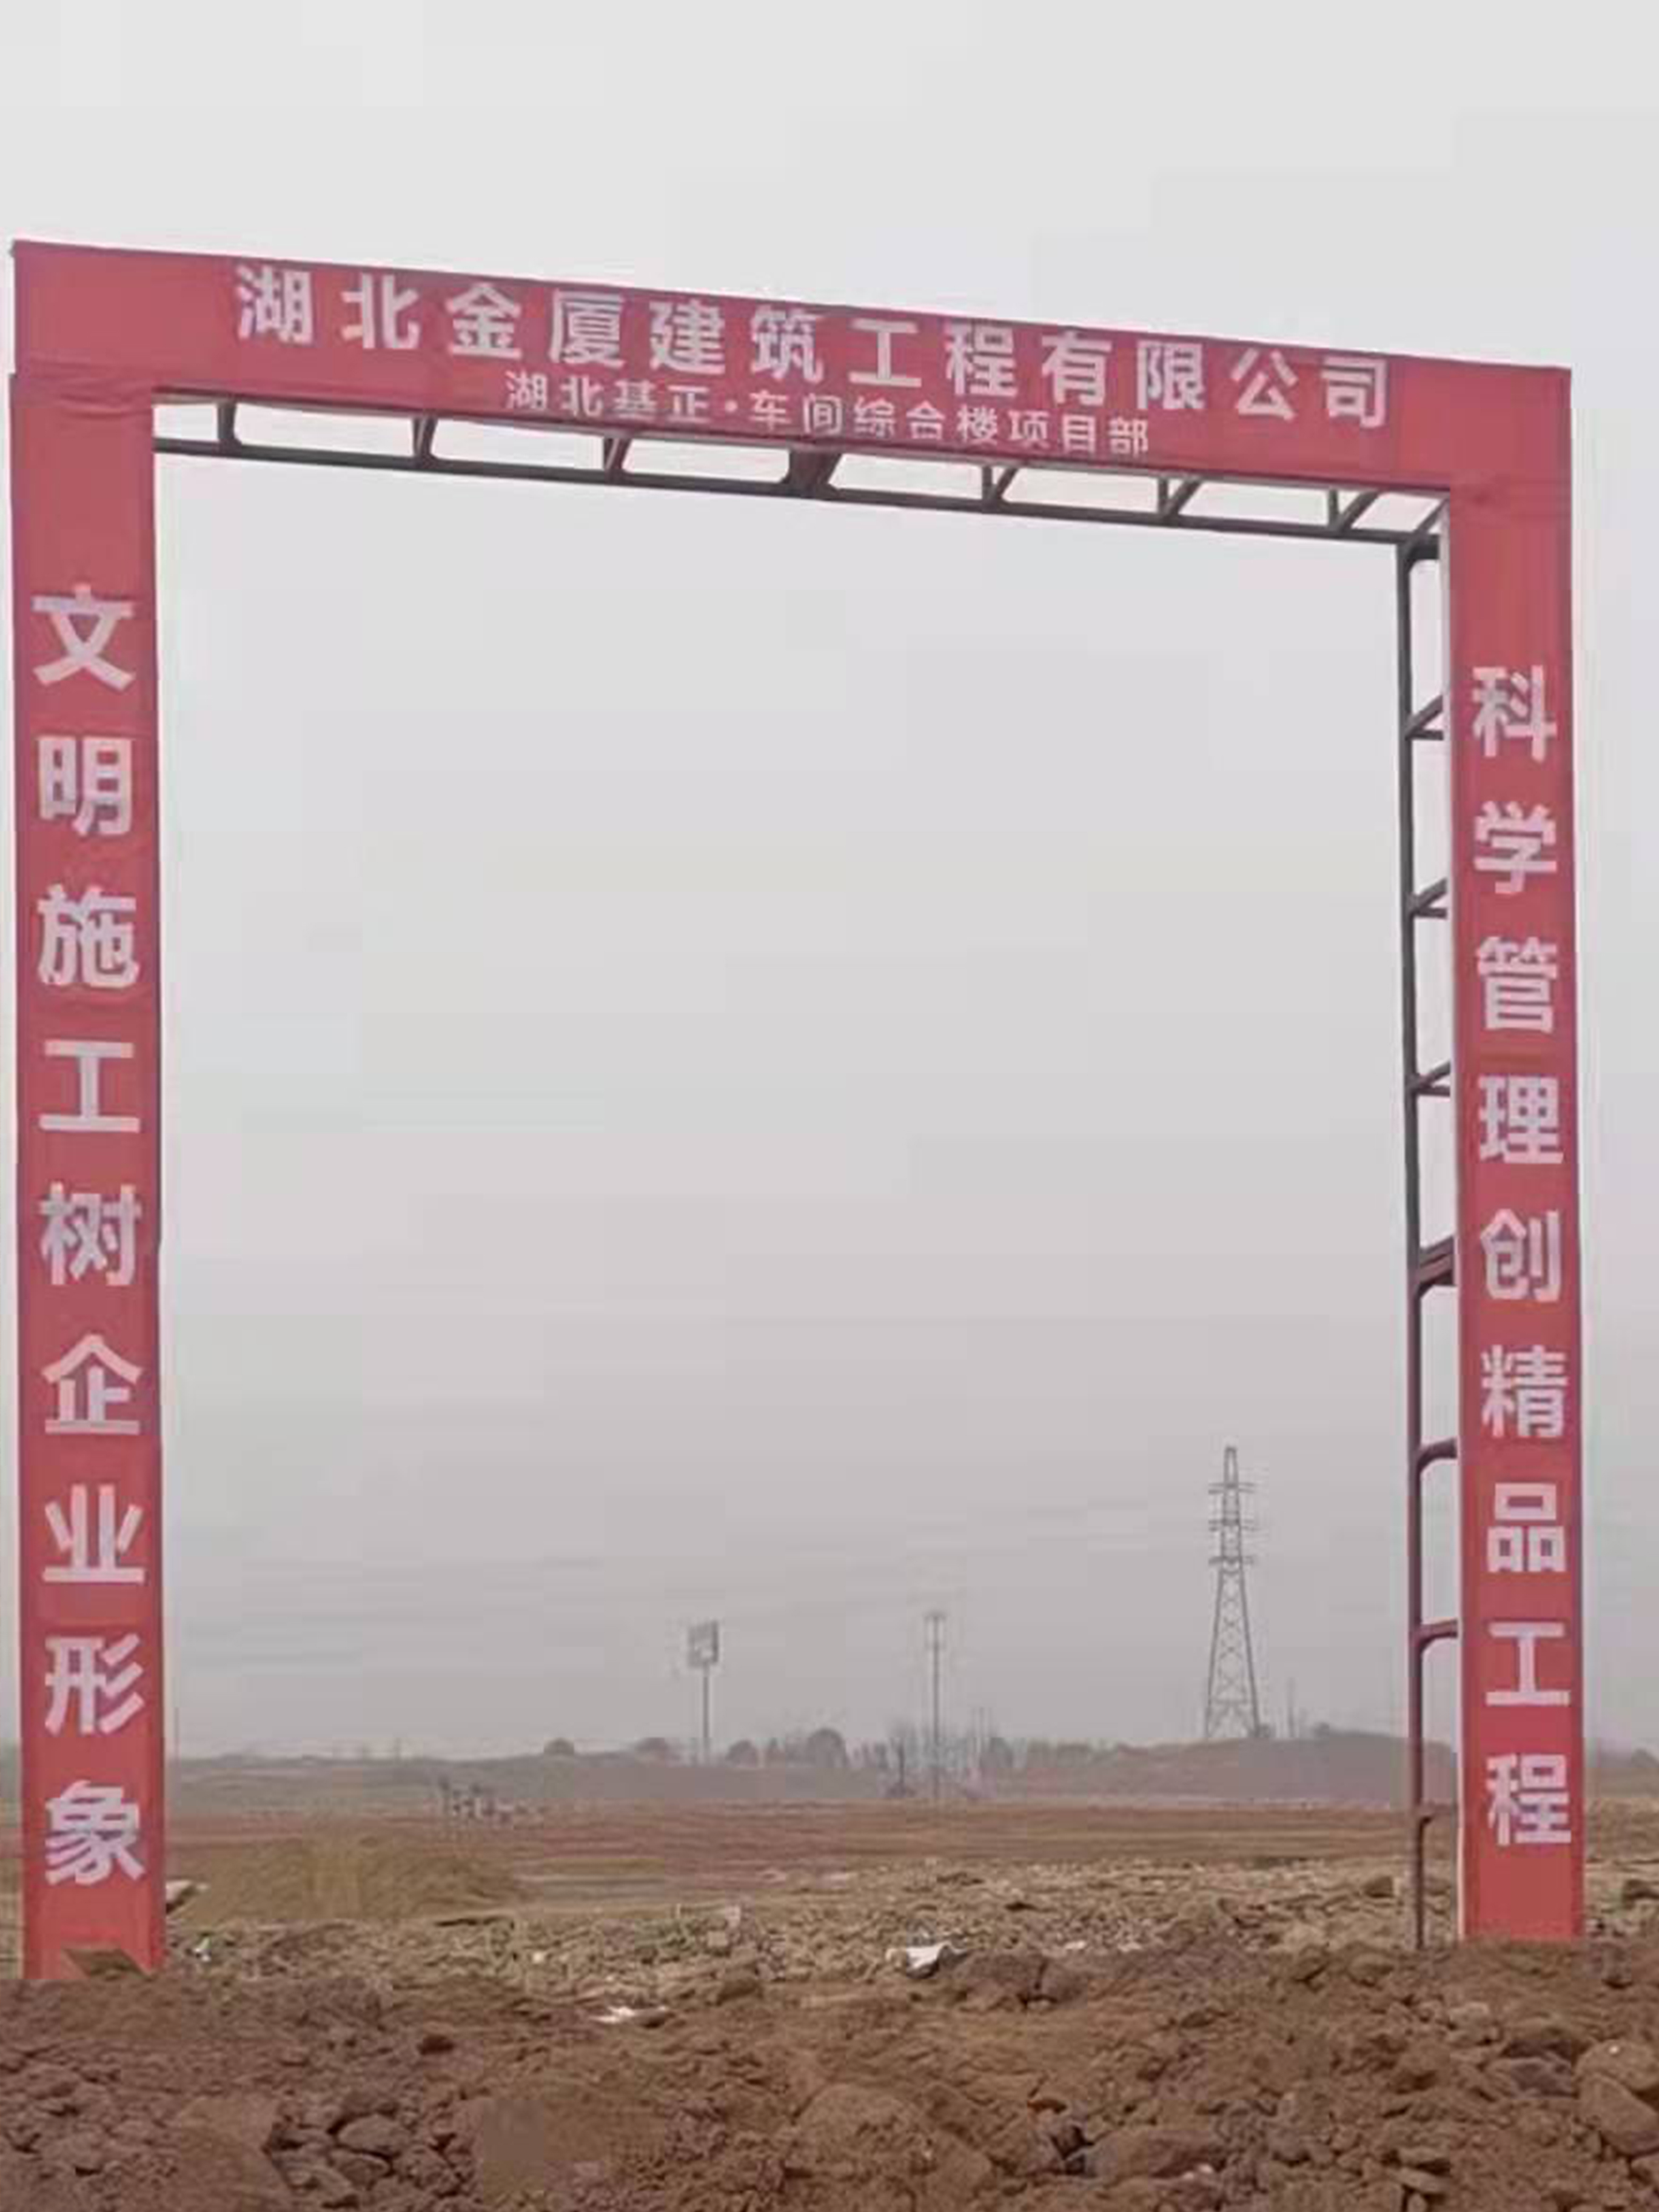 New factory in Hubei province starting building